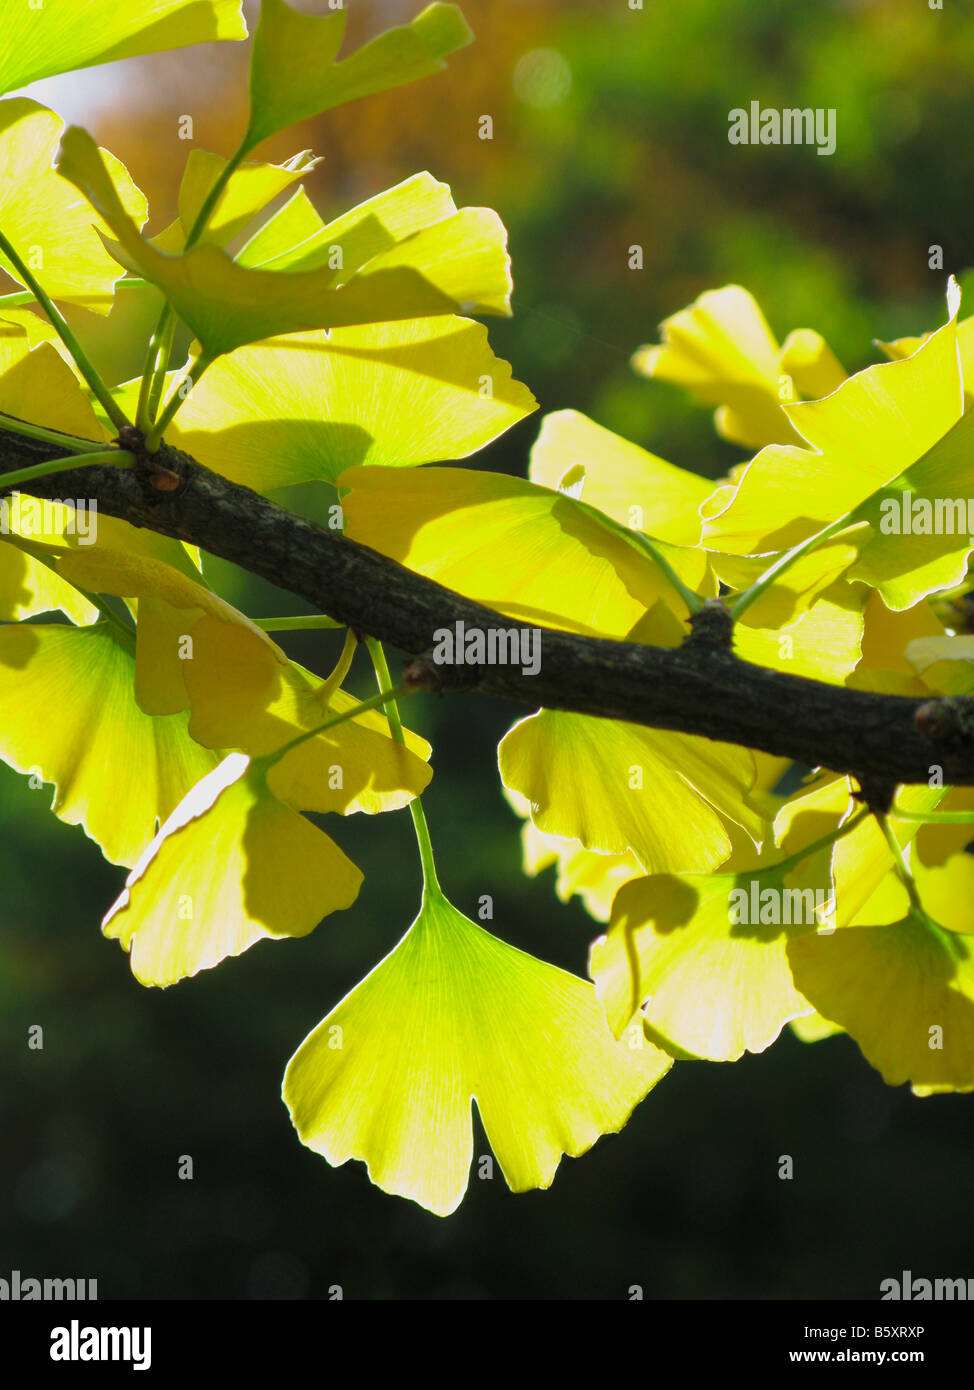 Leaves of the Ginkgo biloba tree in the sunshine. Stock Photo